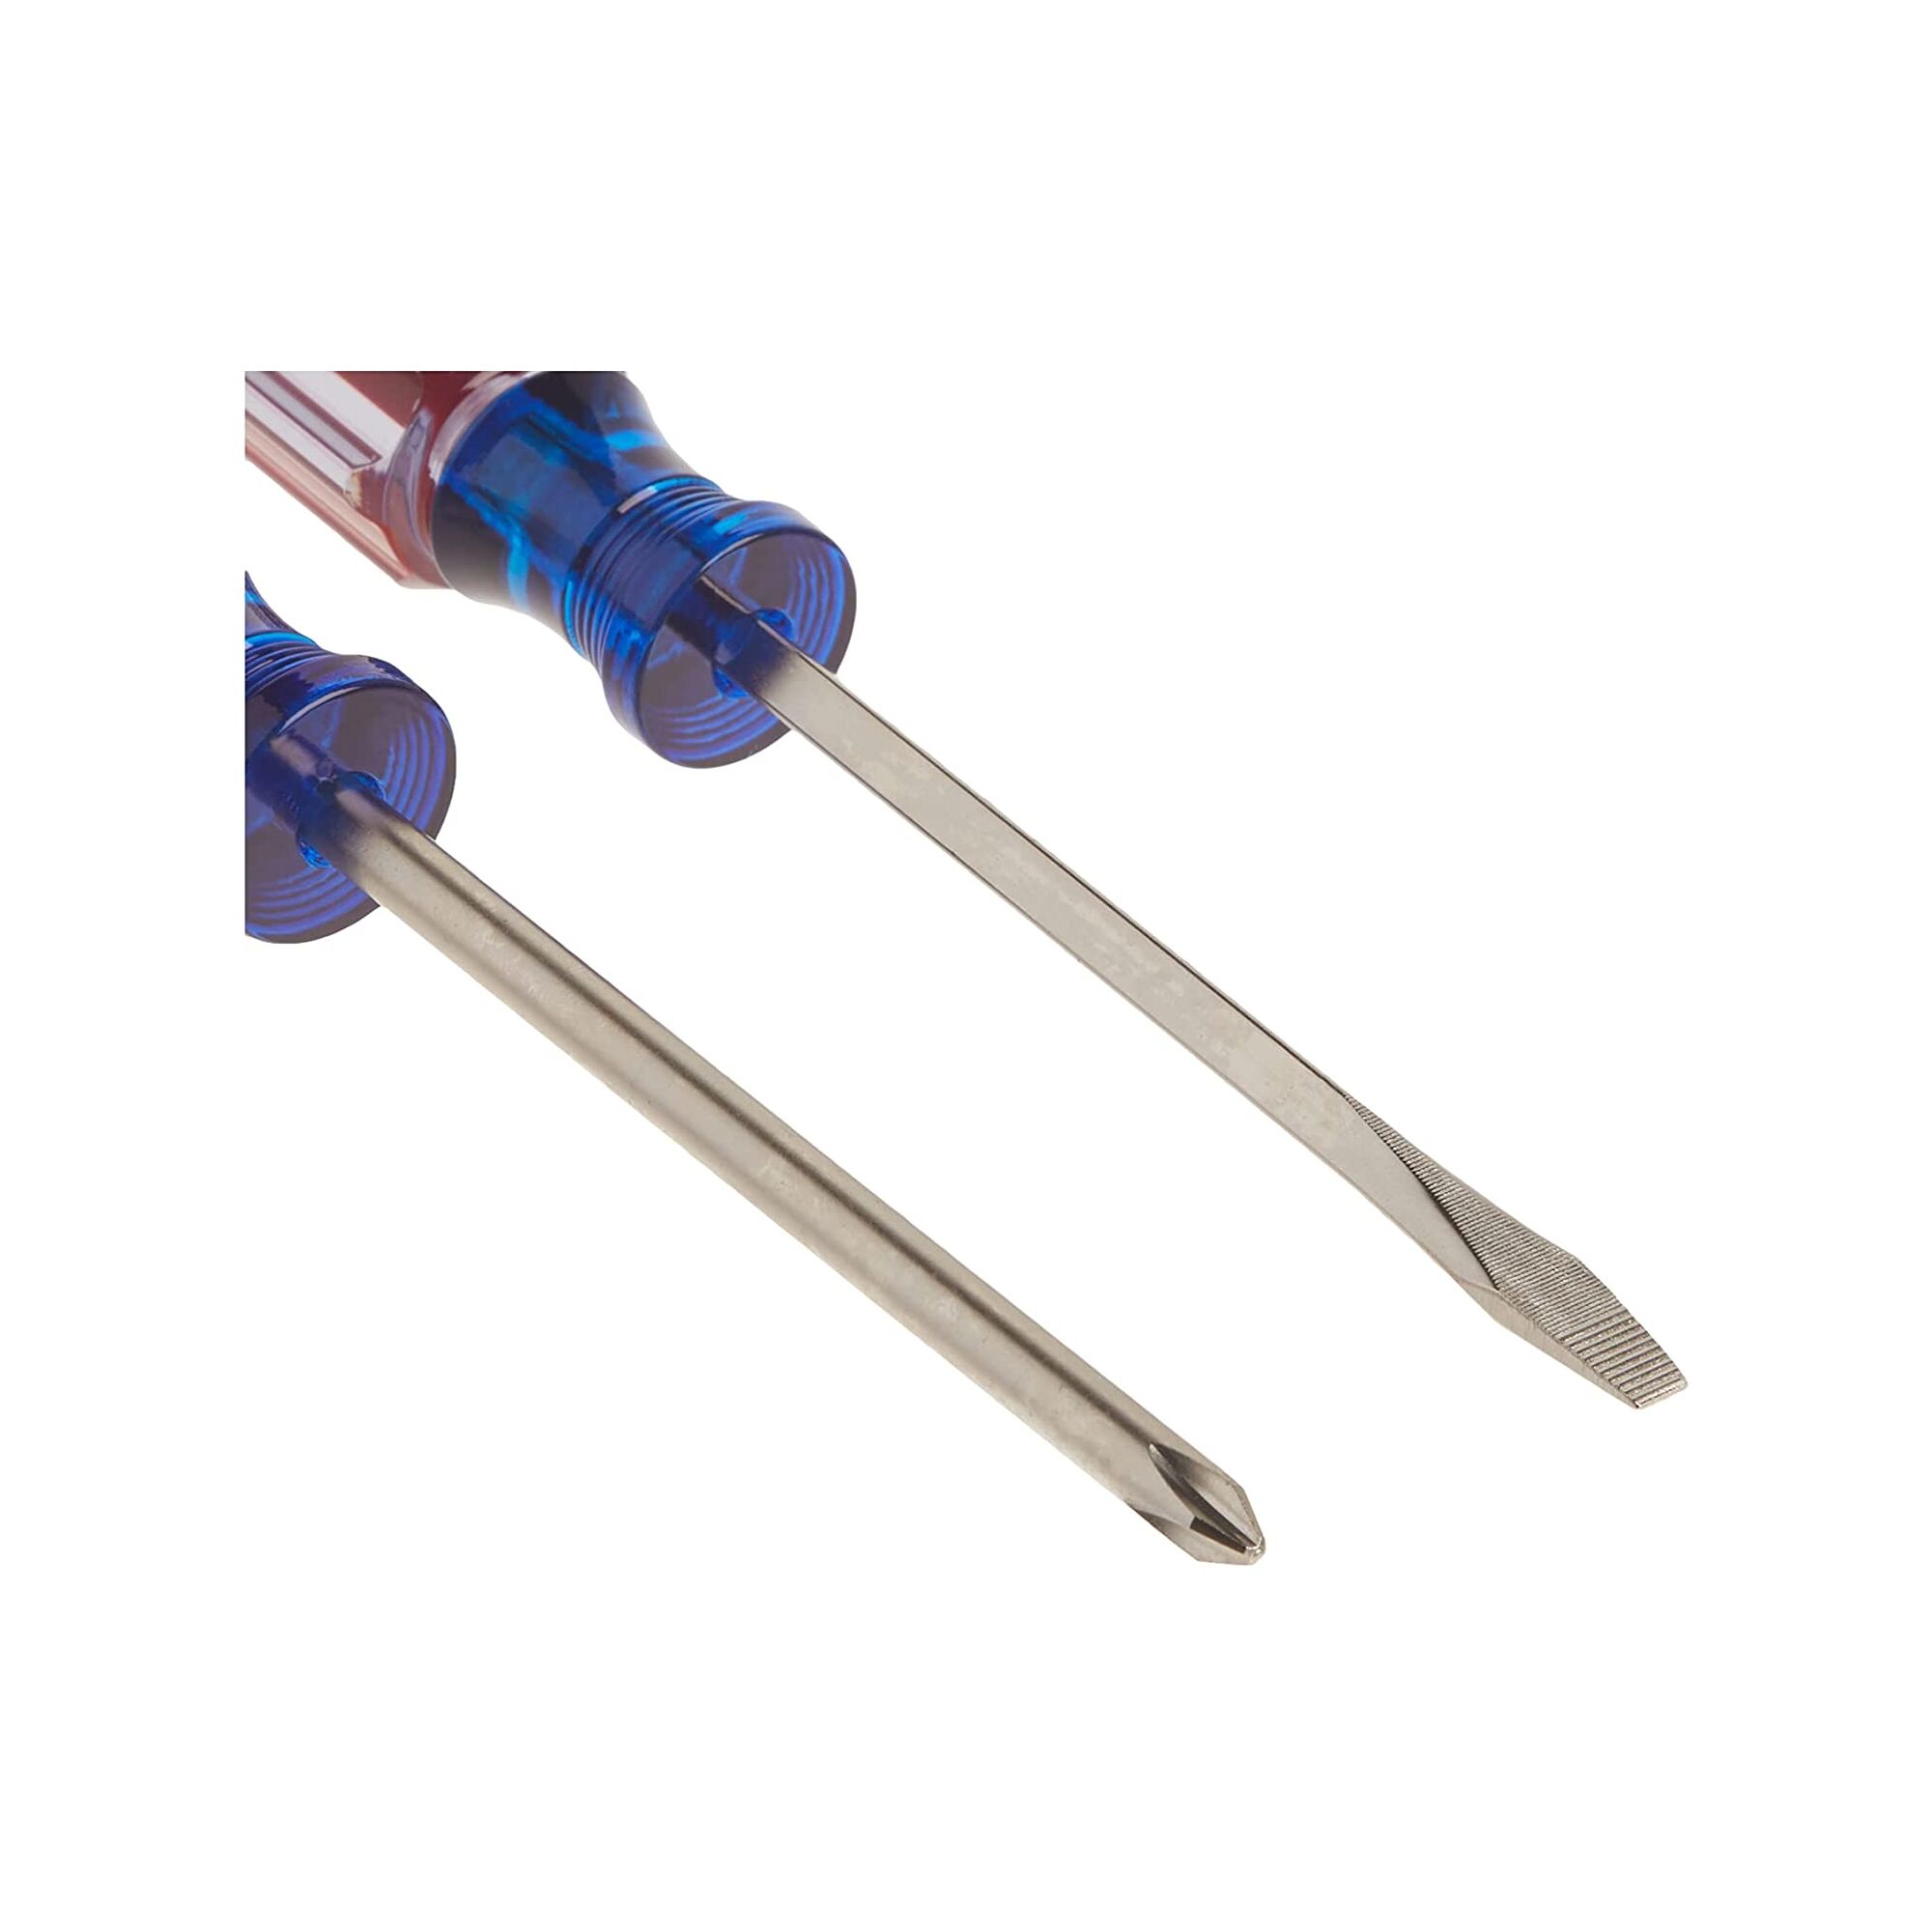 View of CRAFTSMAN Screwdrivers: Acetate highlighting product features